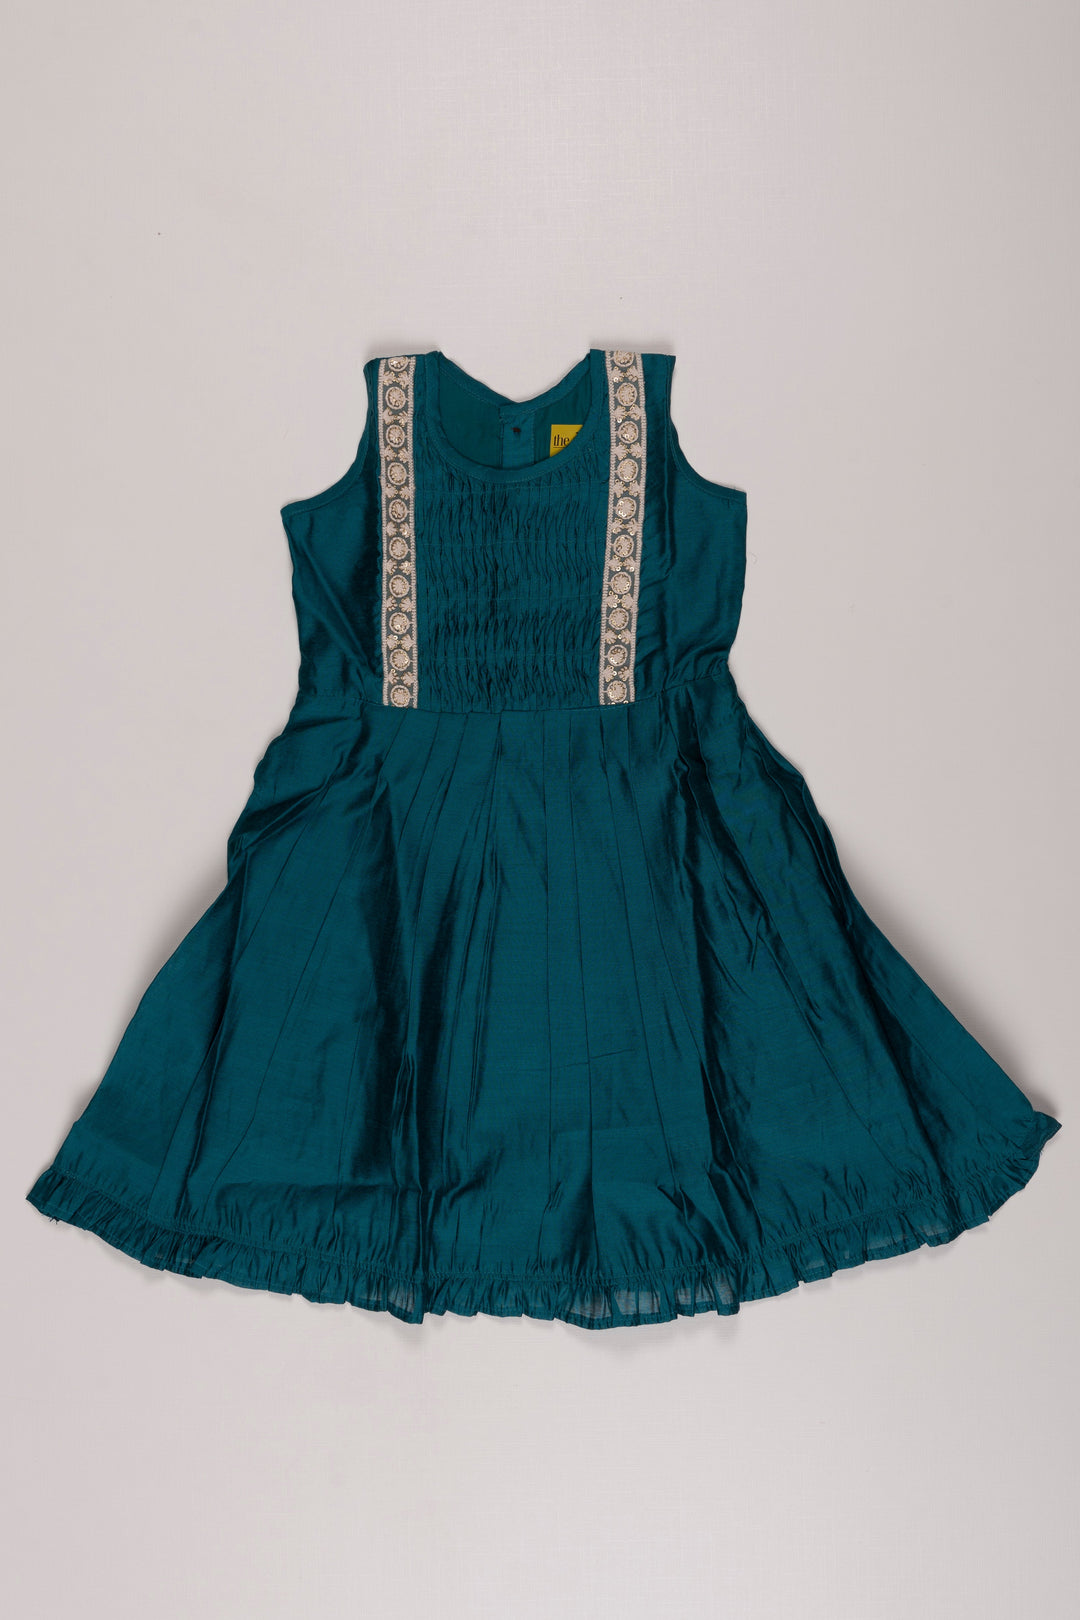 The Nesavu Girls Cotton Frock Teal Blue Pleated Frock with Elegant White Lace Detailing for Girls Nesavu 16 (1Y) / Blue / Chanderi GFC1242A-16 Elegant Teal Blue Lace Frock for Girls | Festive Children's Dress | The Nesavu